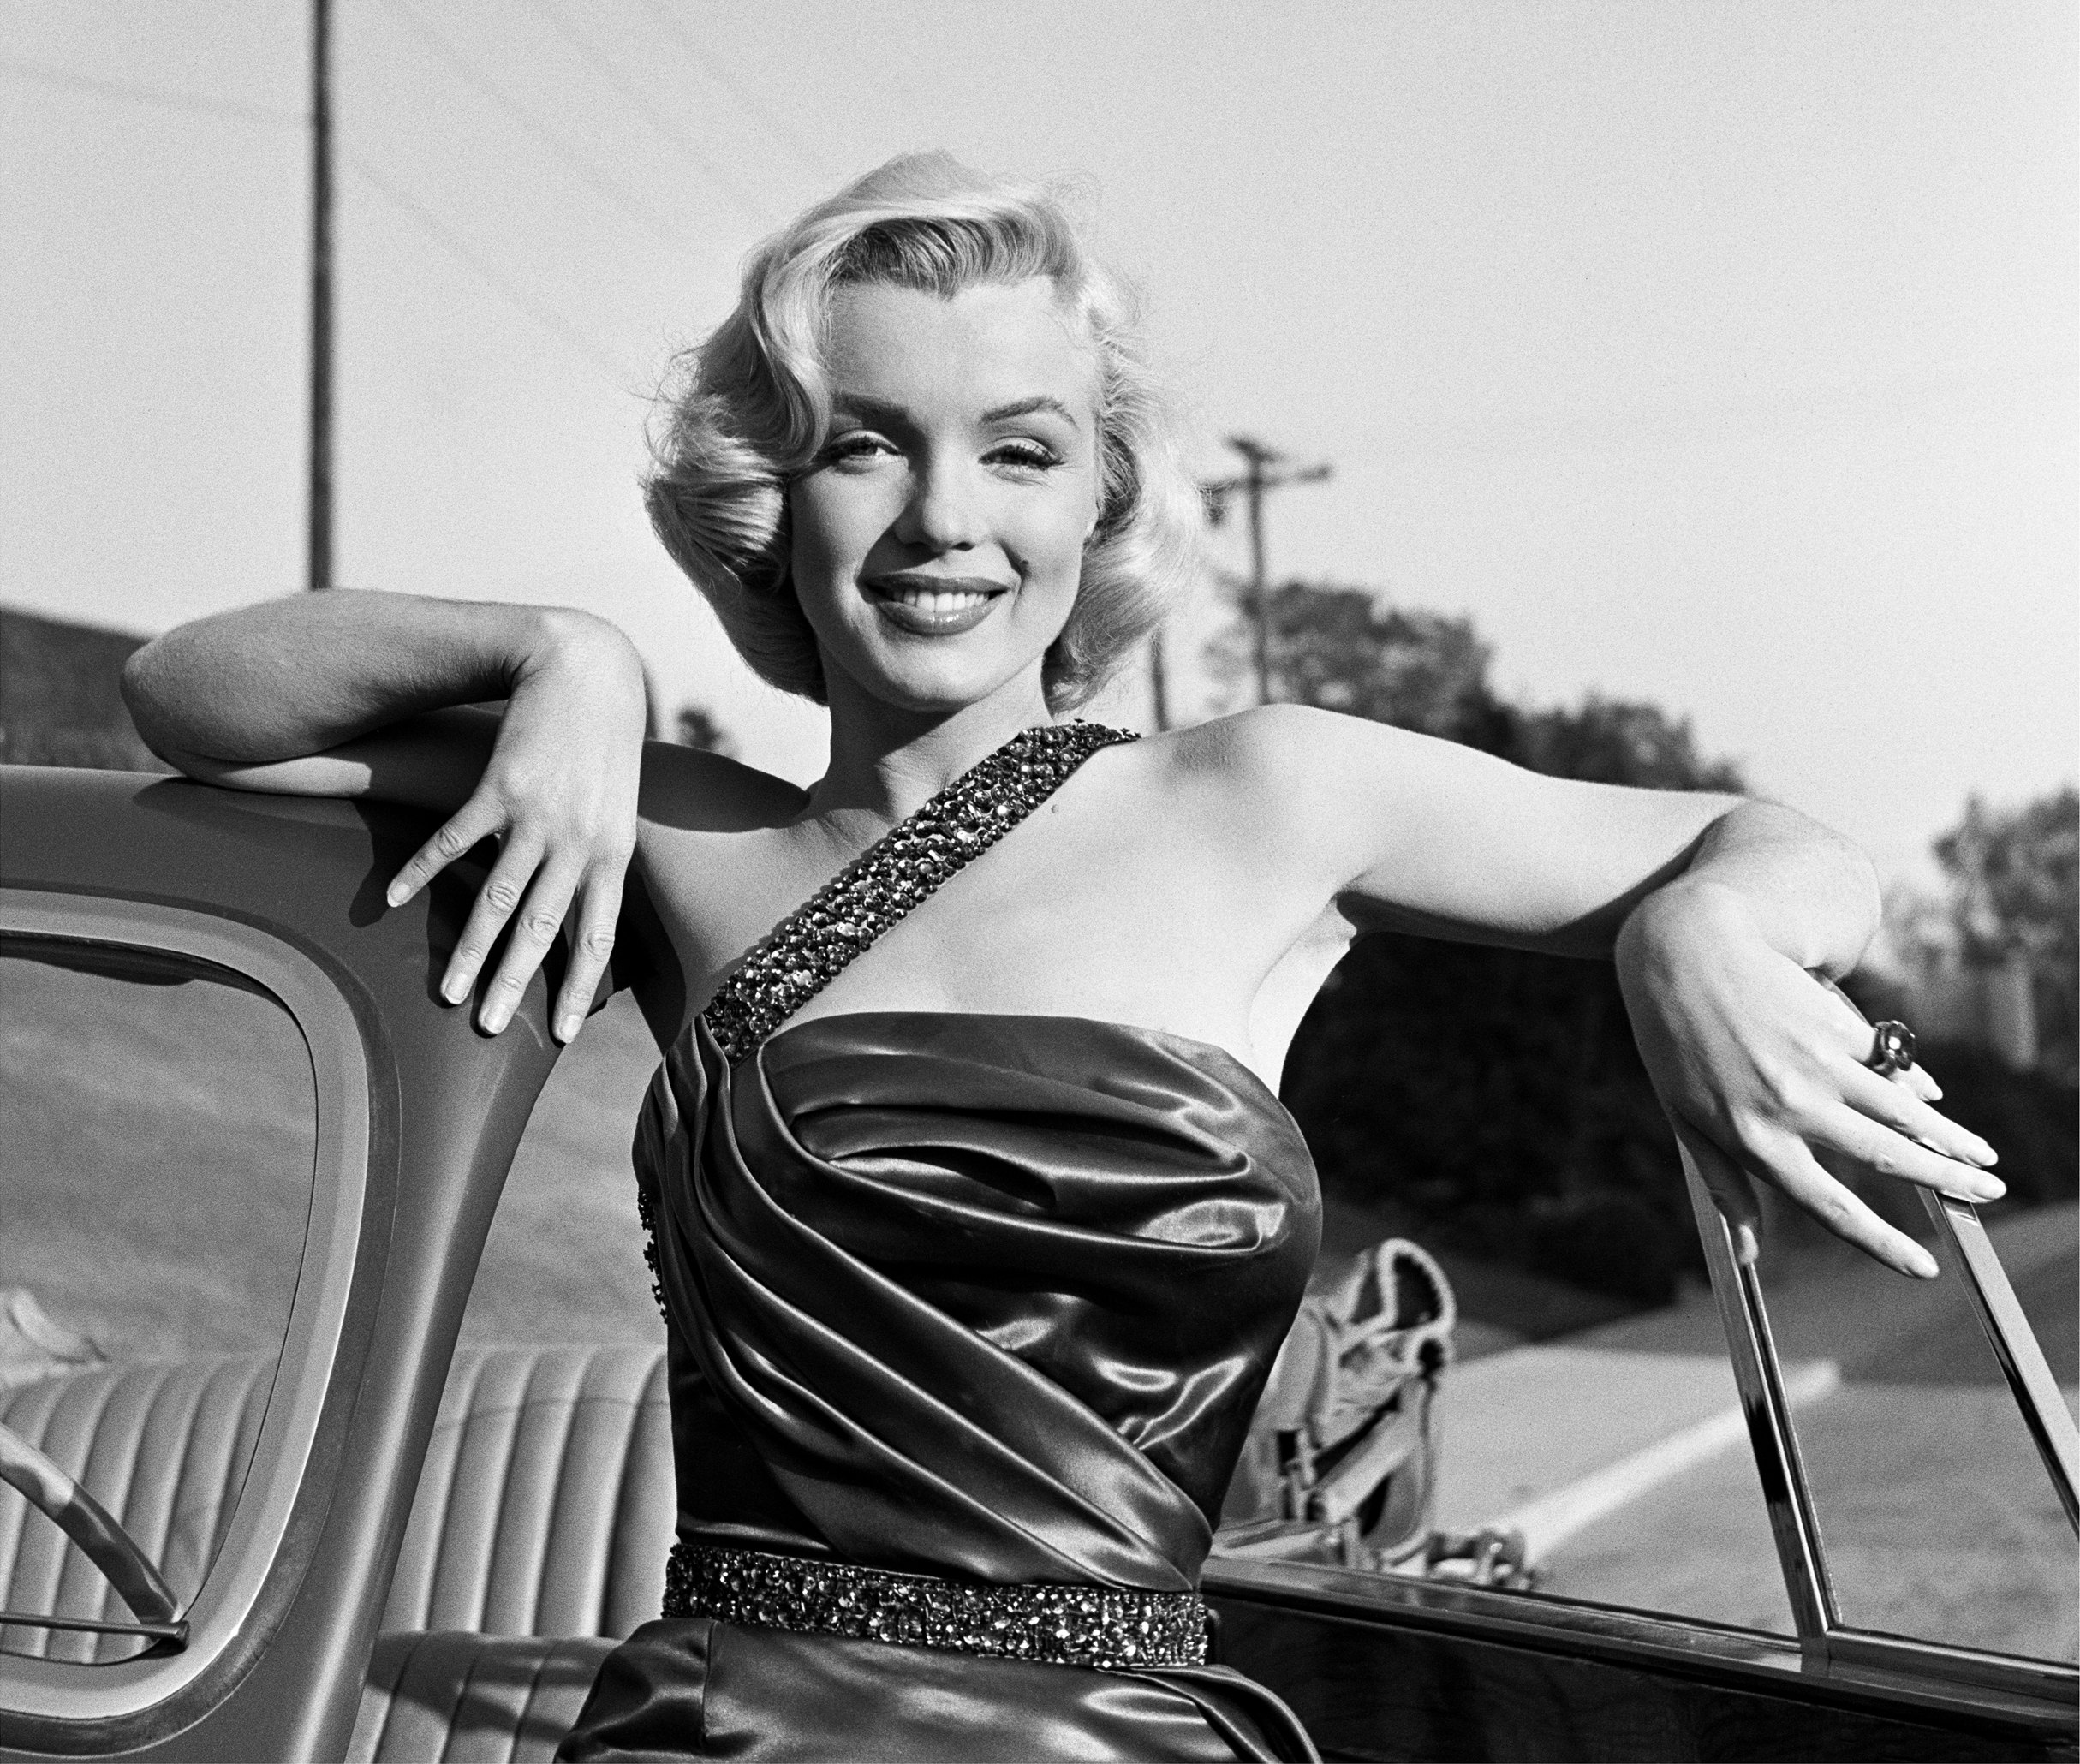 LOS ANGELES - 1953:  Actress Marilyn Monroe leans on a Singer Automobile as she poses for a portrait on the set of the movie "How To Marry A Millionaire" which was released in 1953. (Photo by Frank Worth, Courtesy of Capital Art/Getty Images) (Frank Worth, Courtesy of Capital Art/Getty Images)